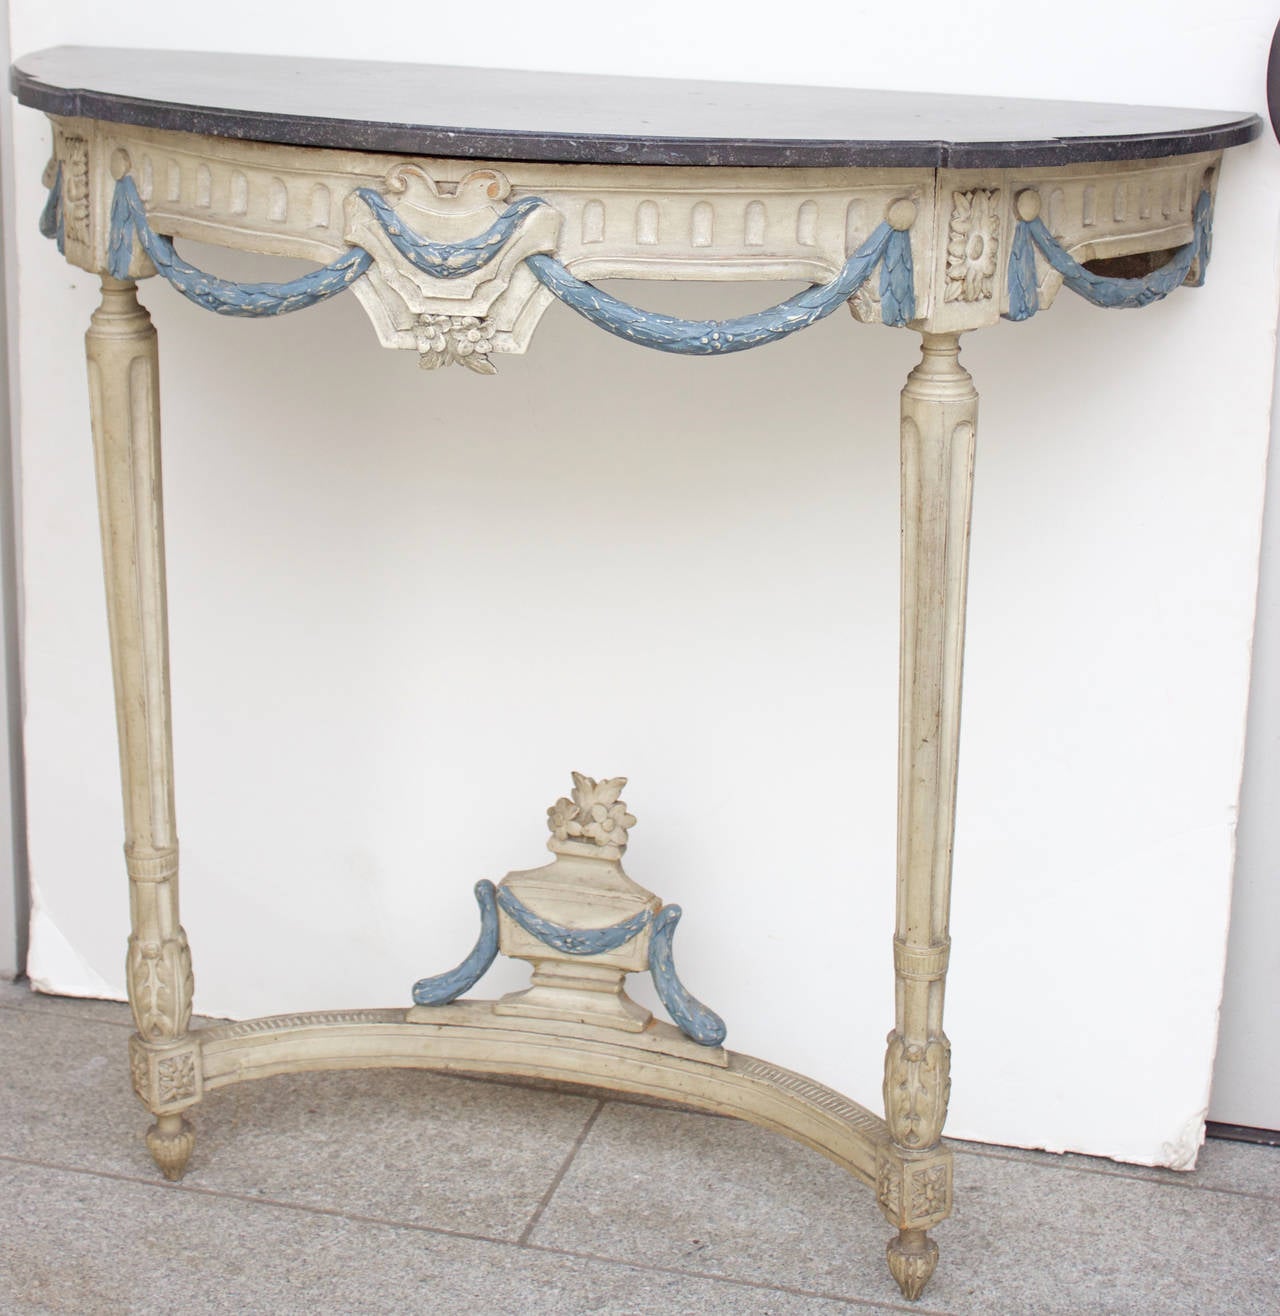 A very fine carved and painted wood console “en demilune” with its original black marble top above a frieze with hanging laurel garlands painted in blue. The console is supported by tapered fluted legs joined by a stretcher surmounted in its center